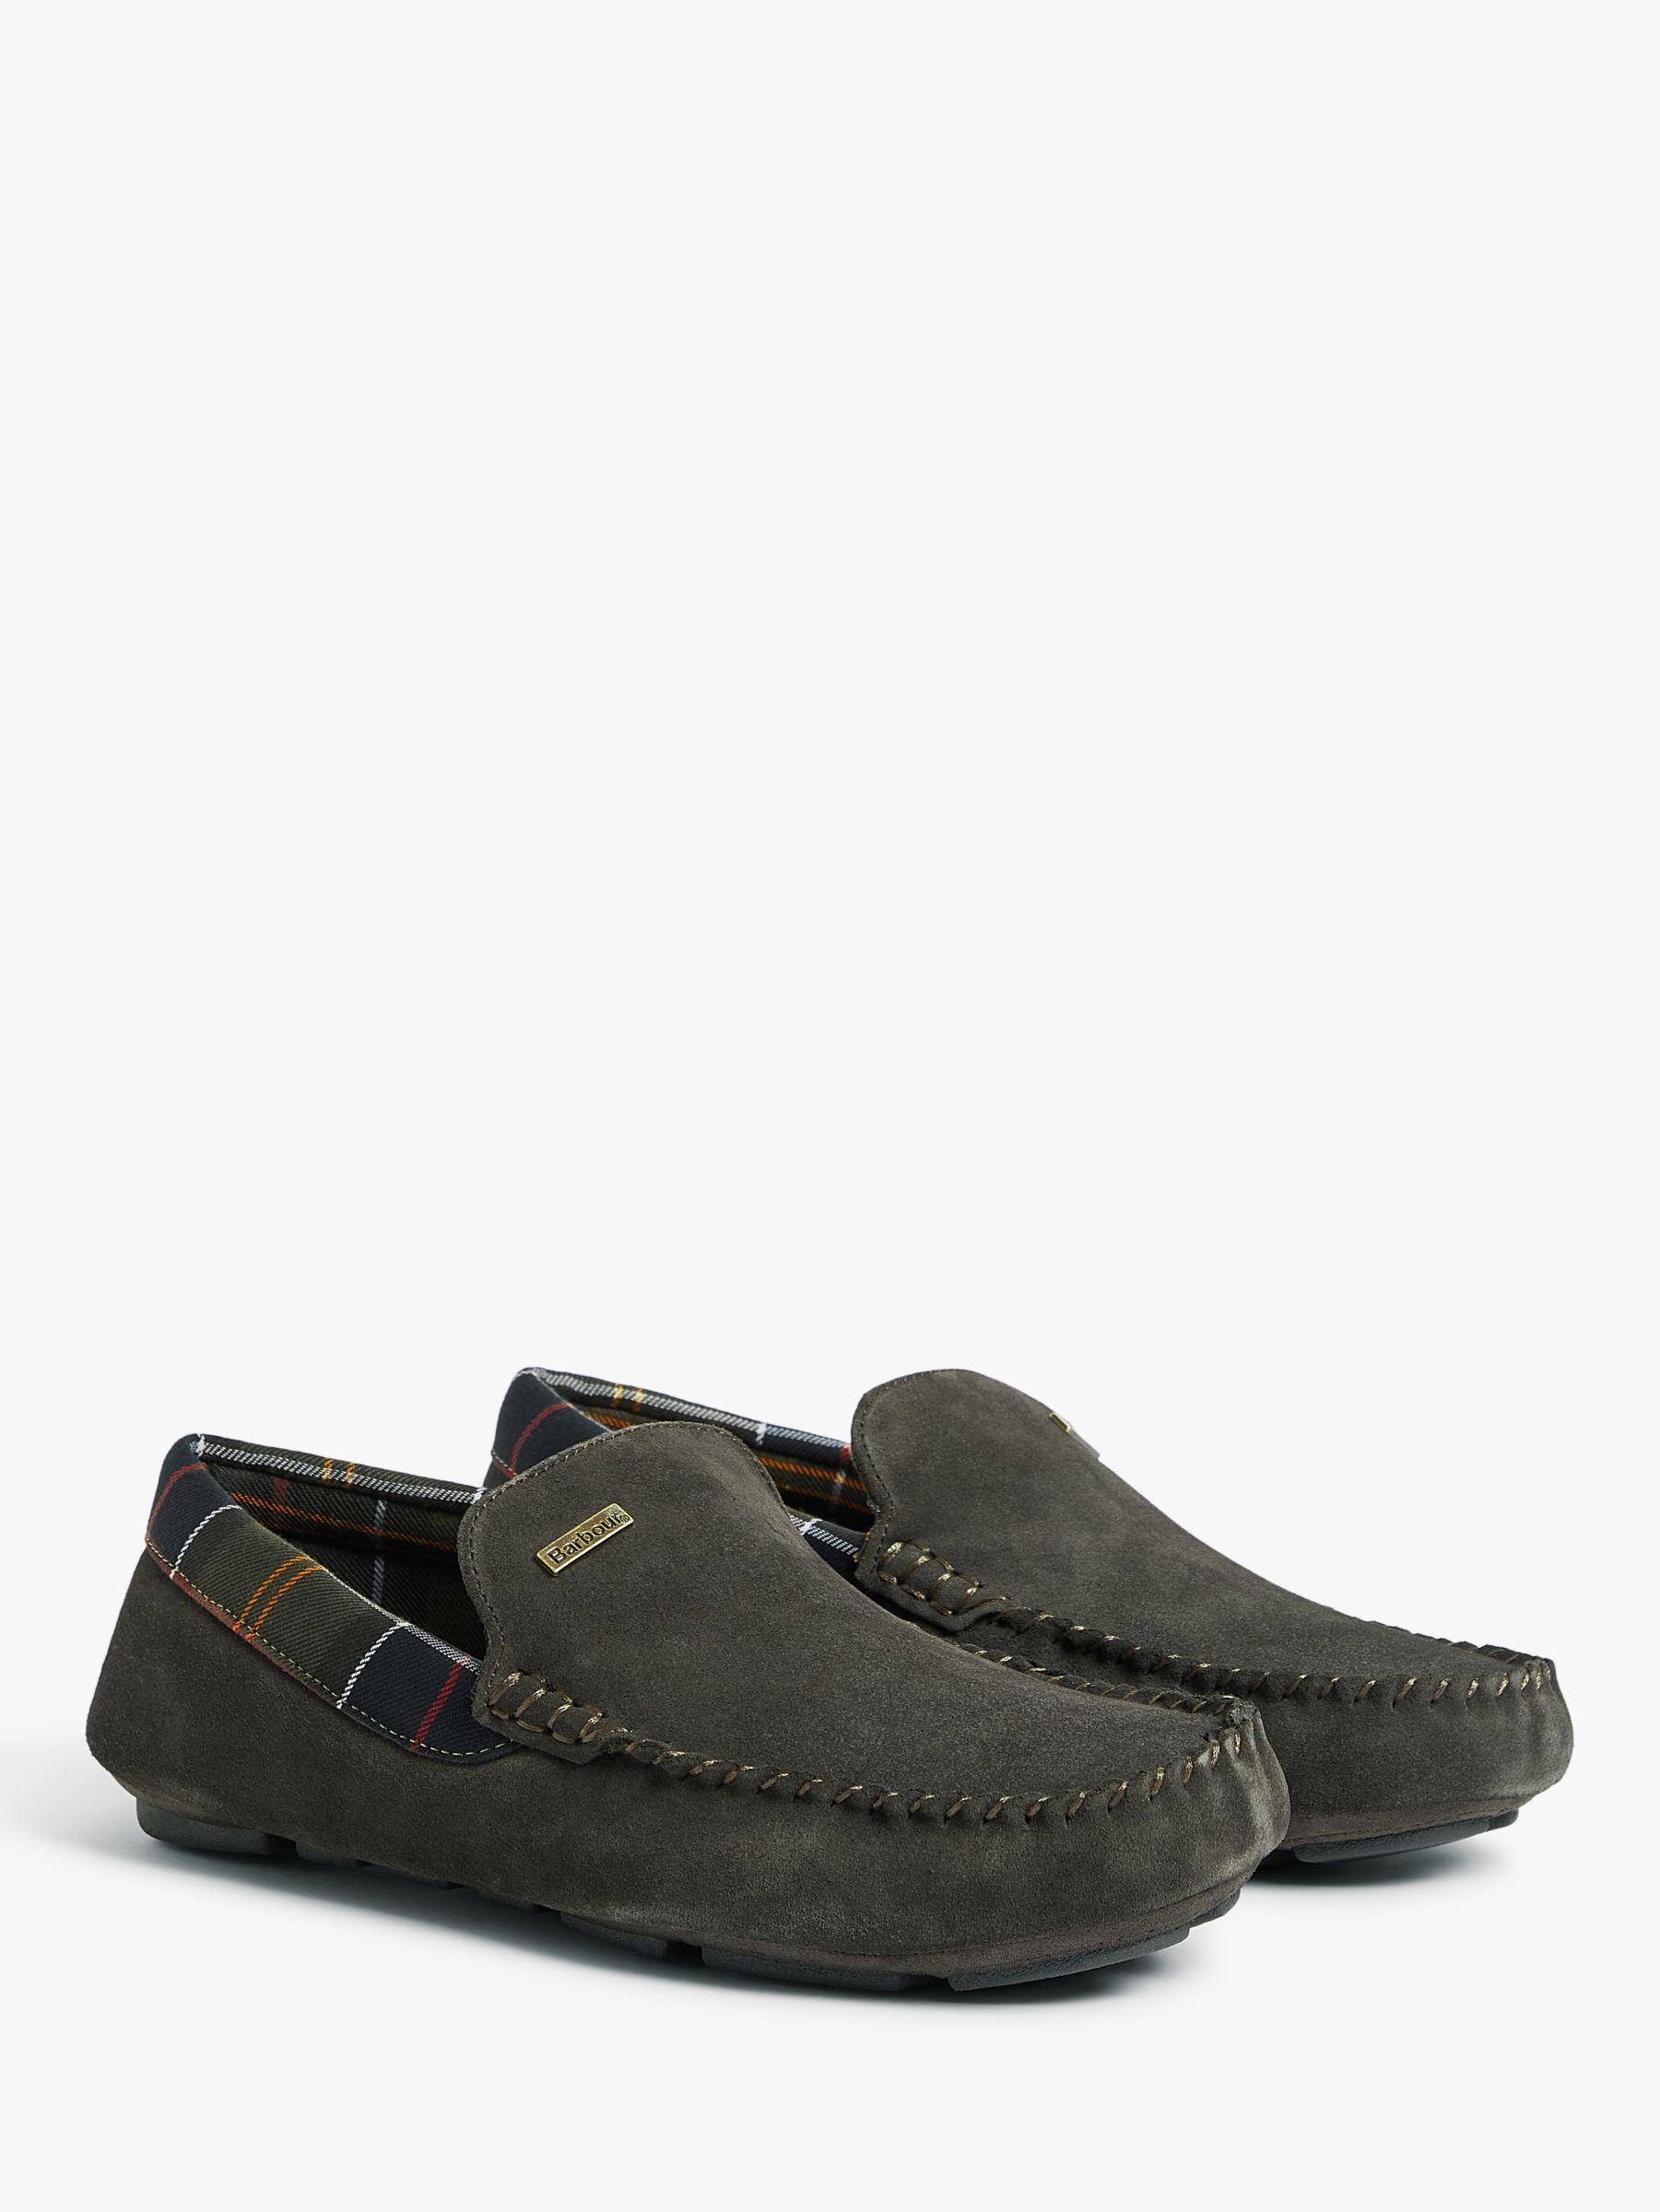 Barbour Barrow Moccasin Slippers, Chocolate